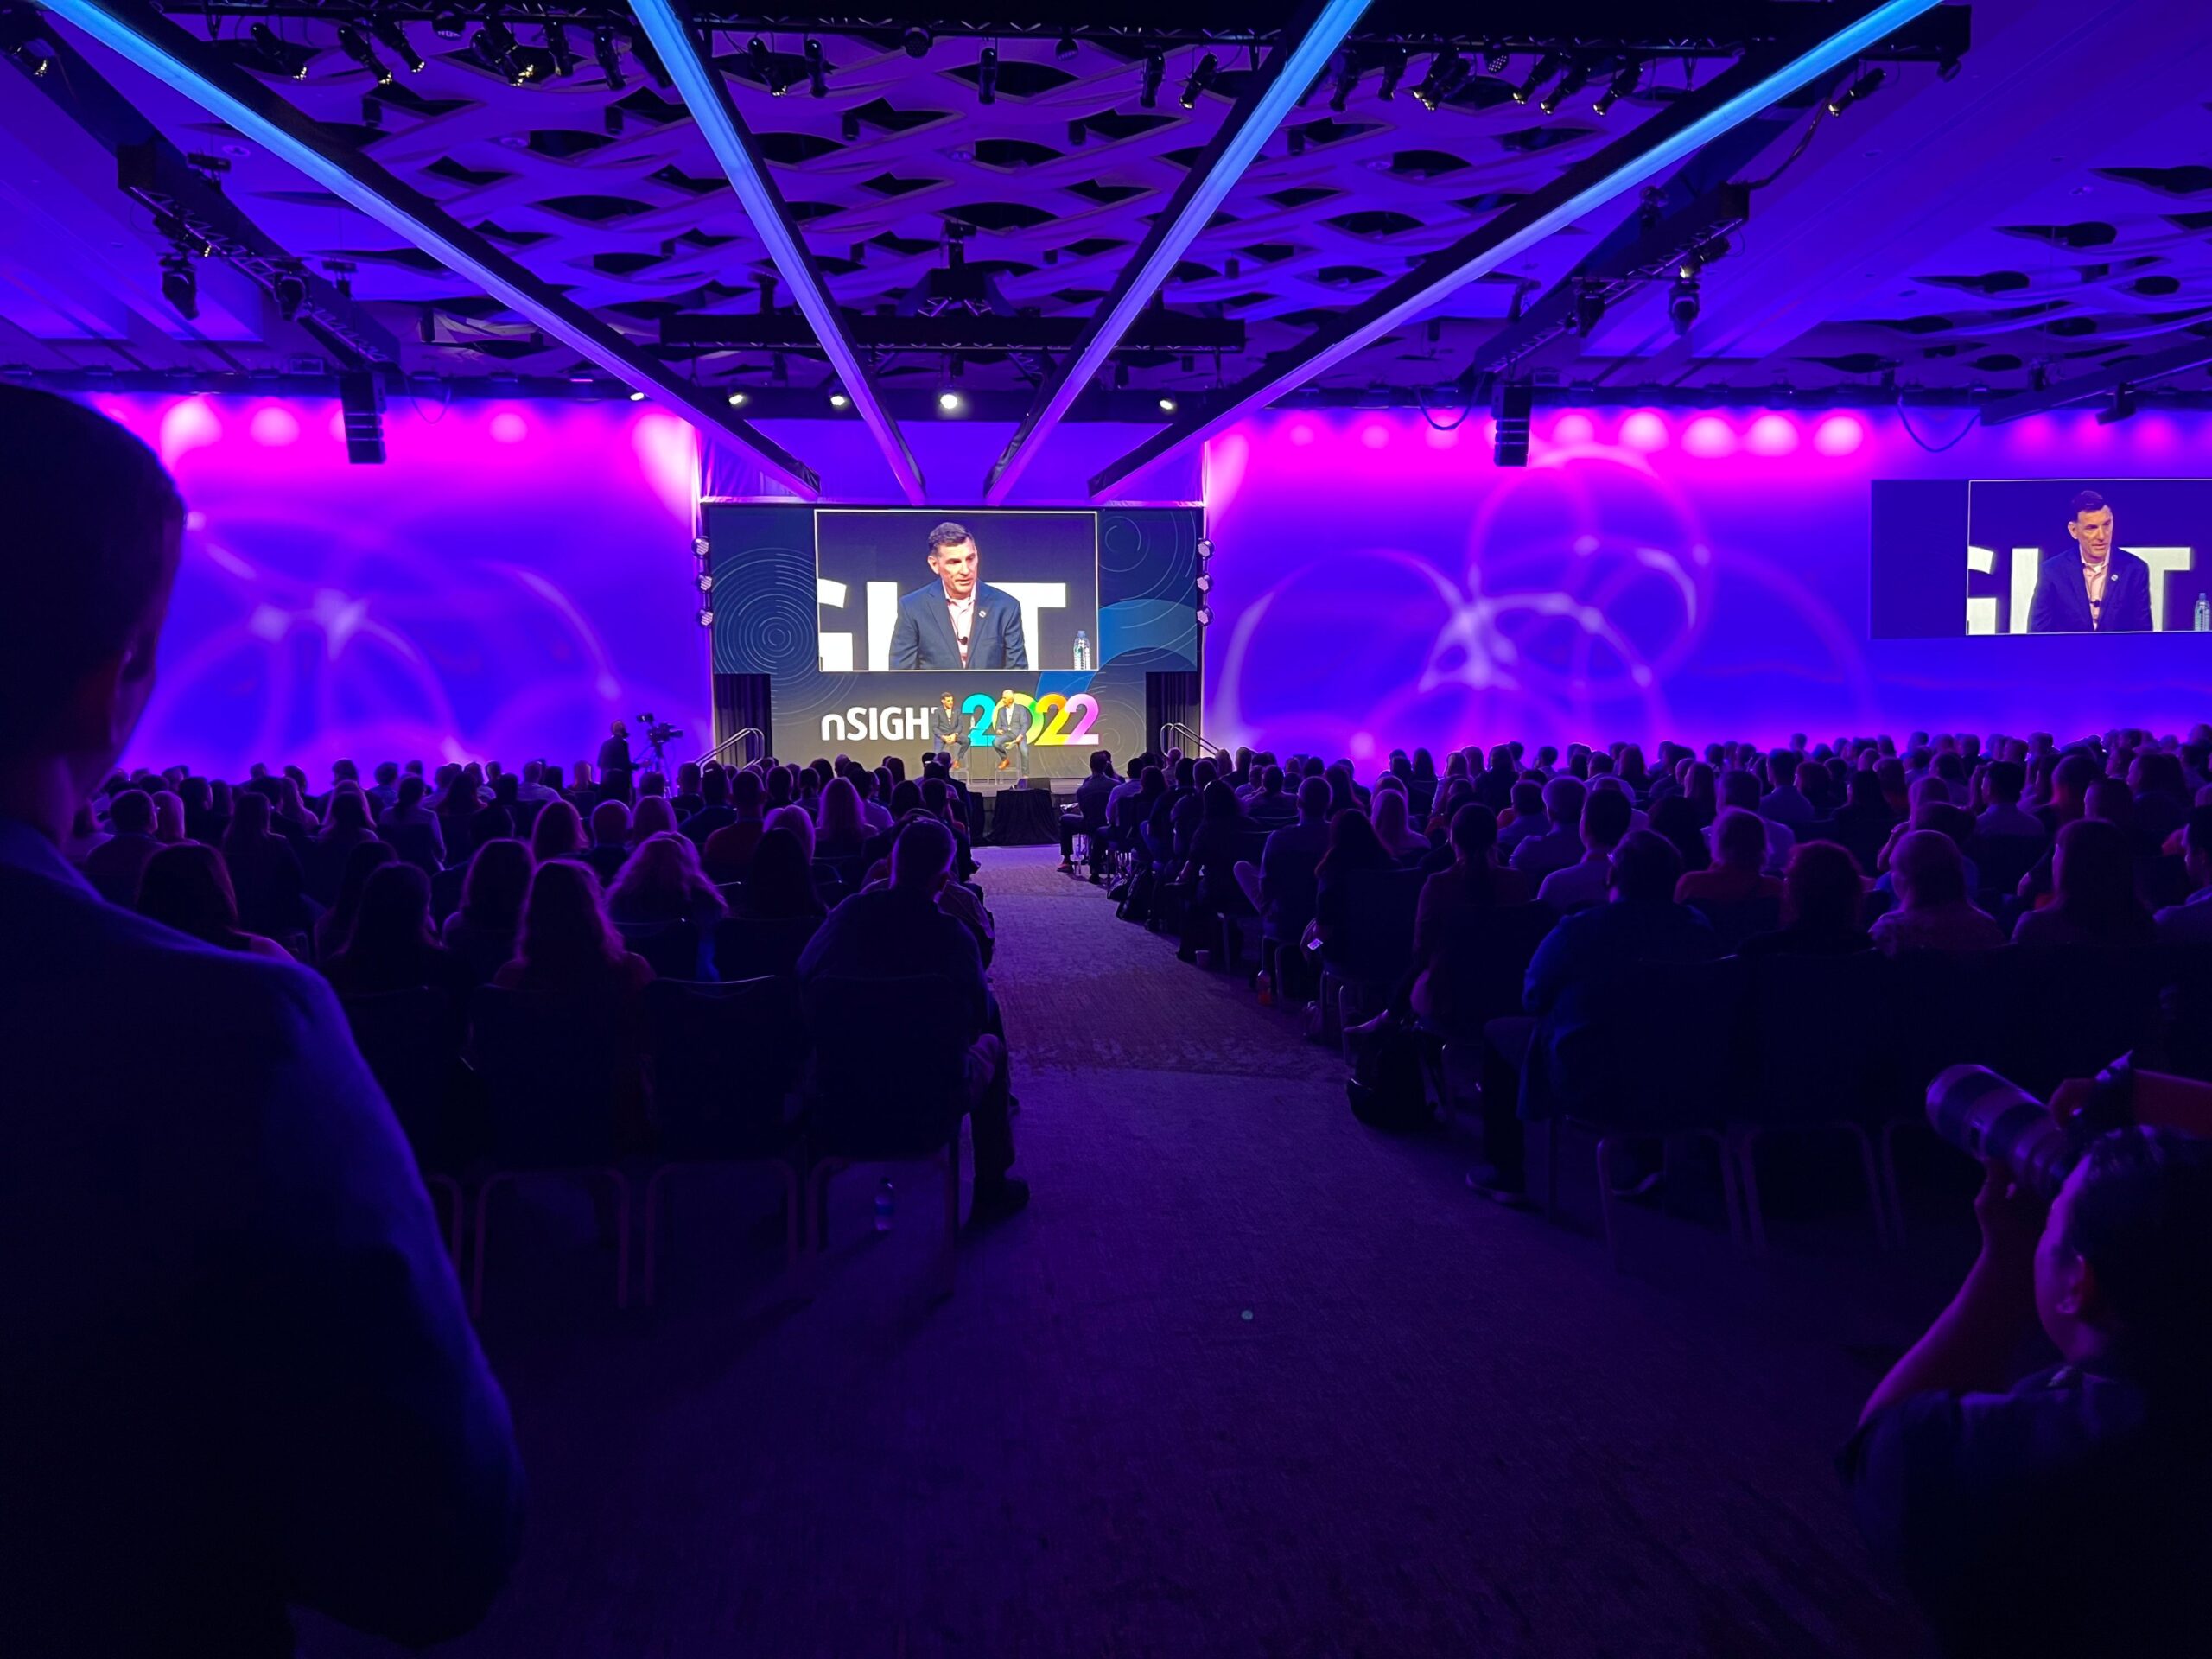 A crowd watches a speaker during nSight 2022. There are purple lights on either side of the projector.